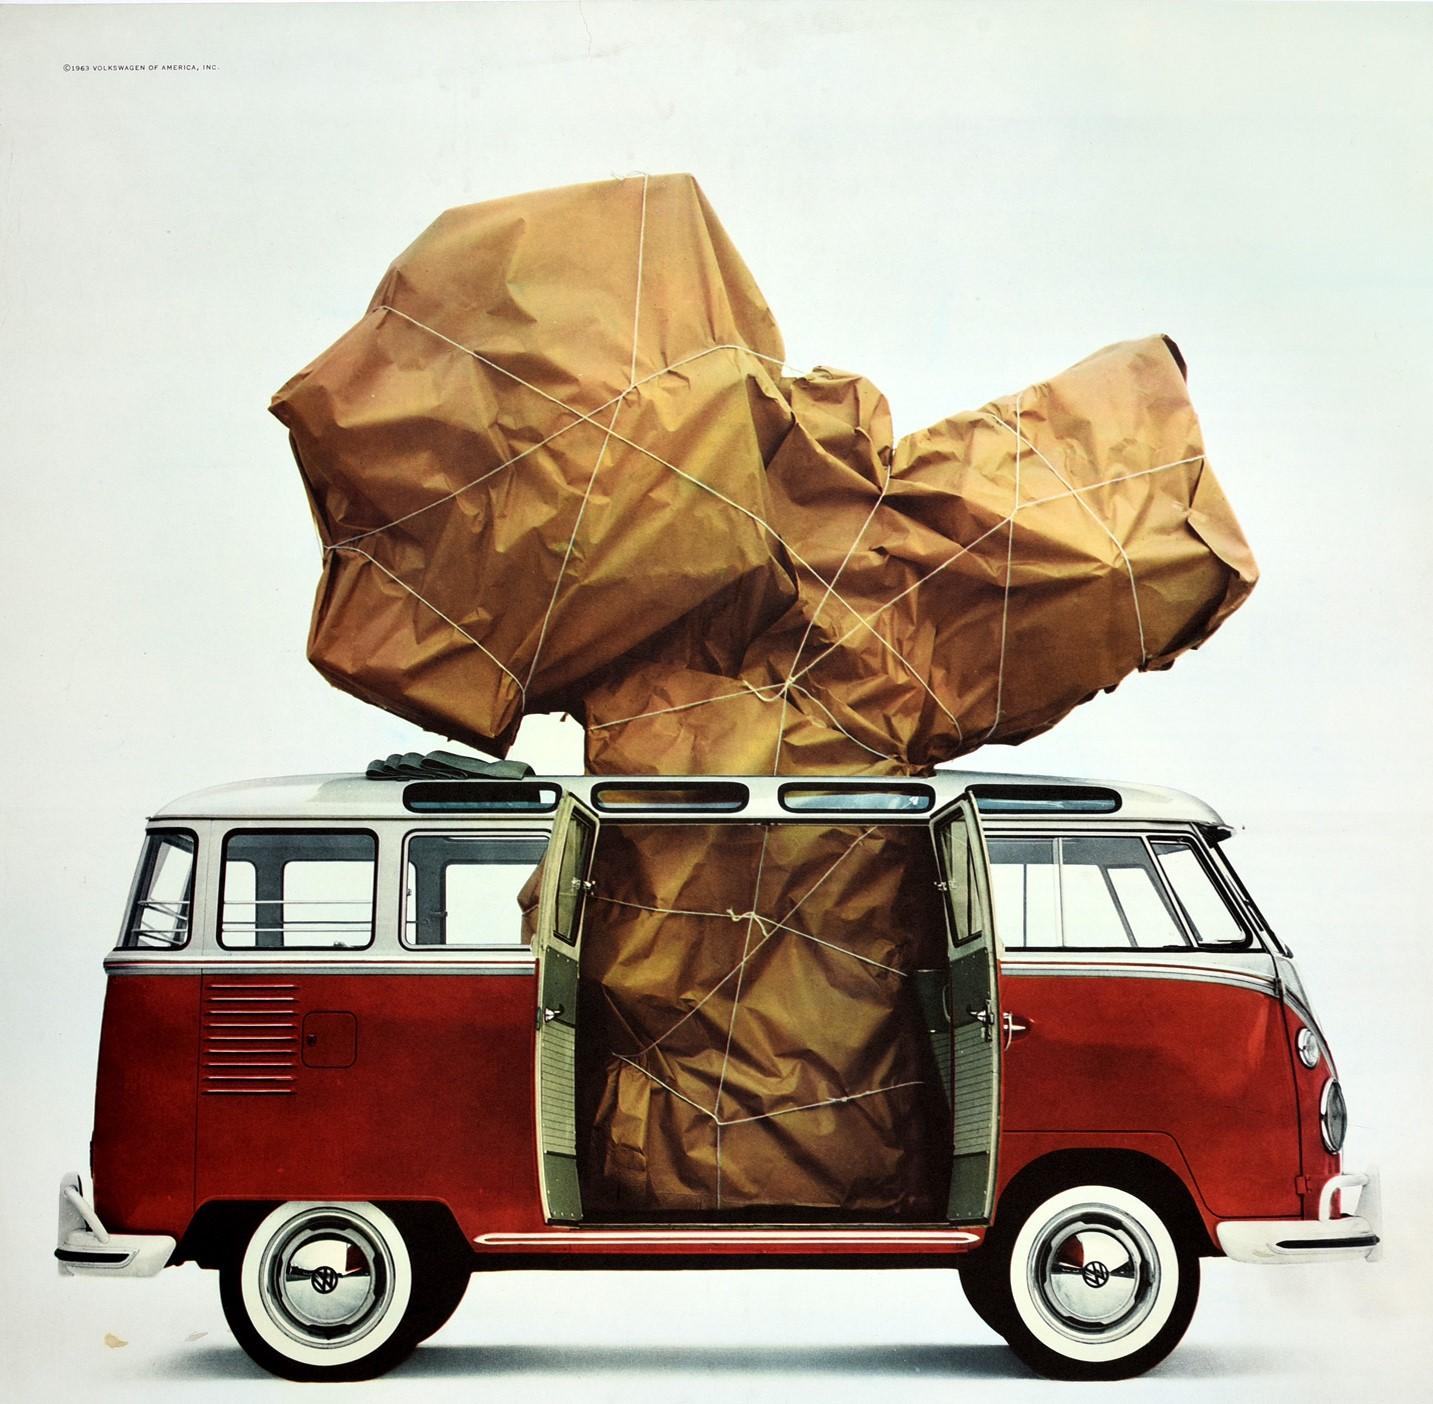 Original vintage camper van dealer showroom advertising poster for Volkswagen - What is it? - featuring a great design depicting big package wrapped in brown paper and string visible through the open doors of a red Volkswagen station wagon and from